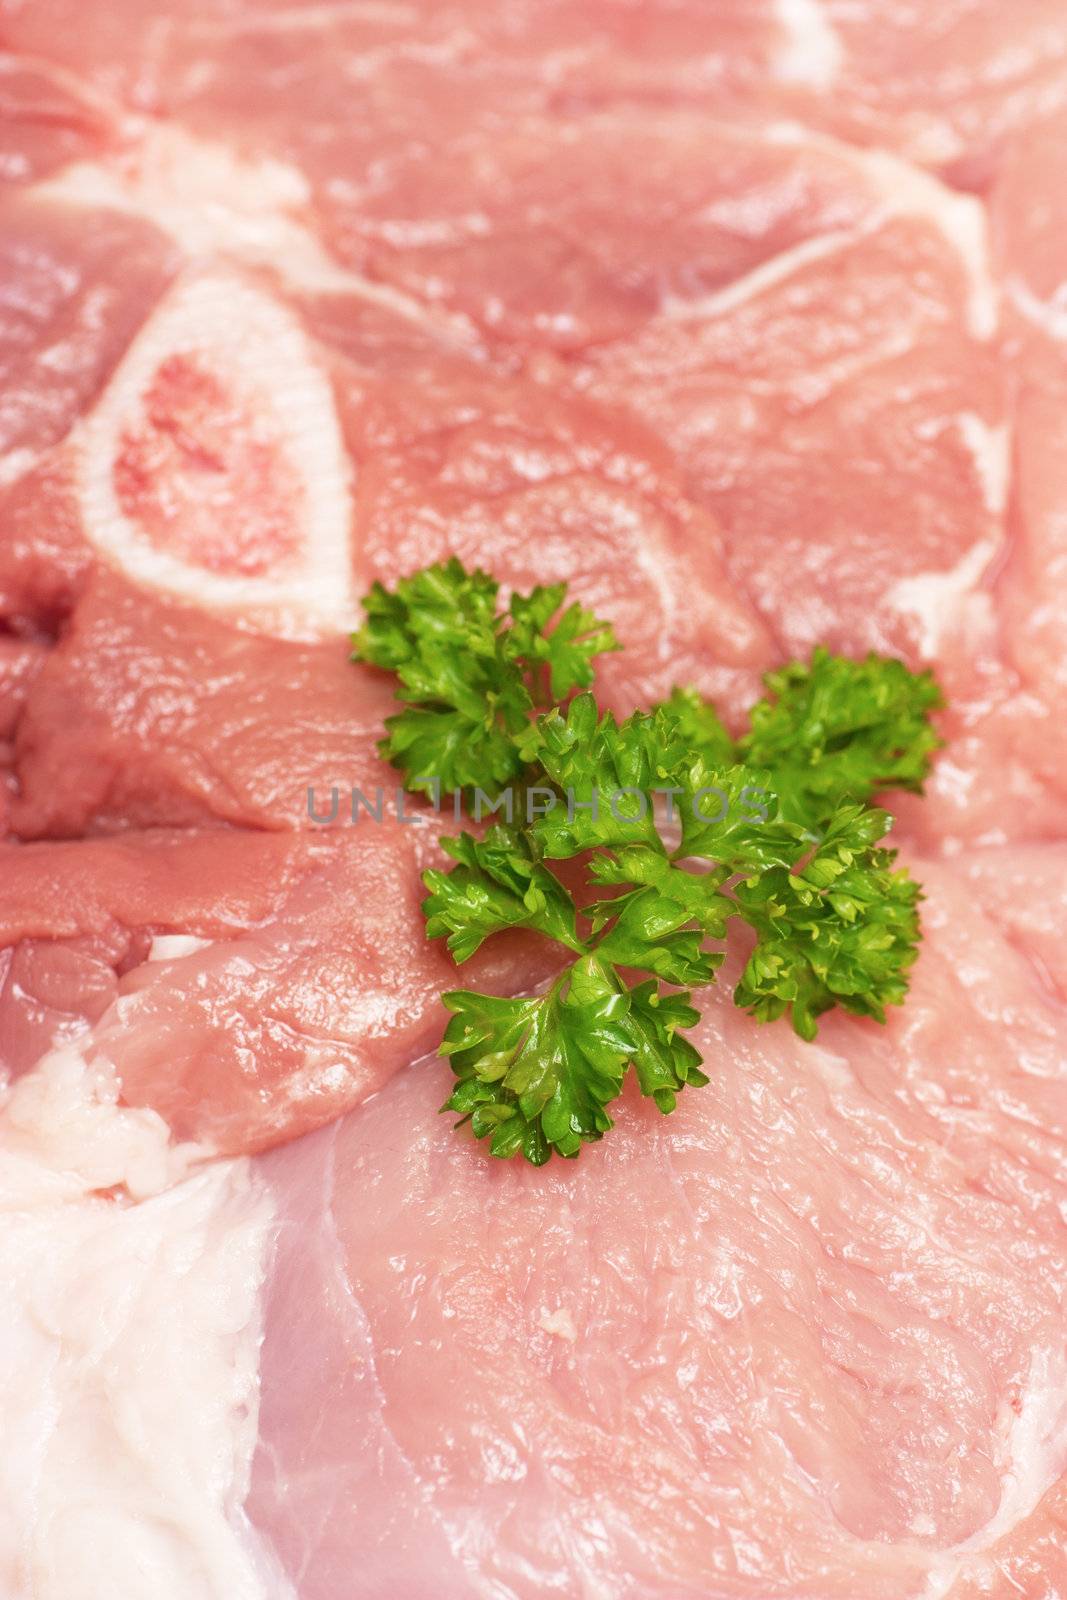 Unprepared cutted meat and green parsley